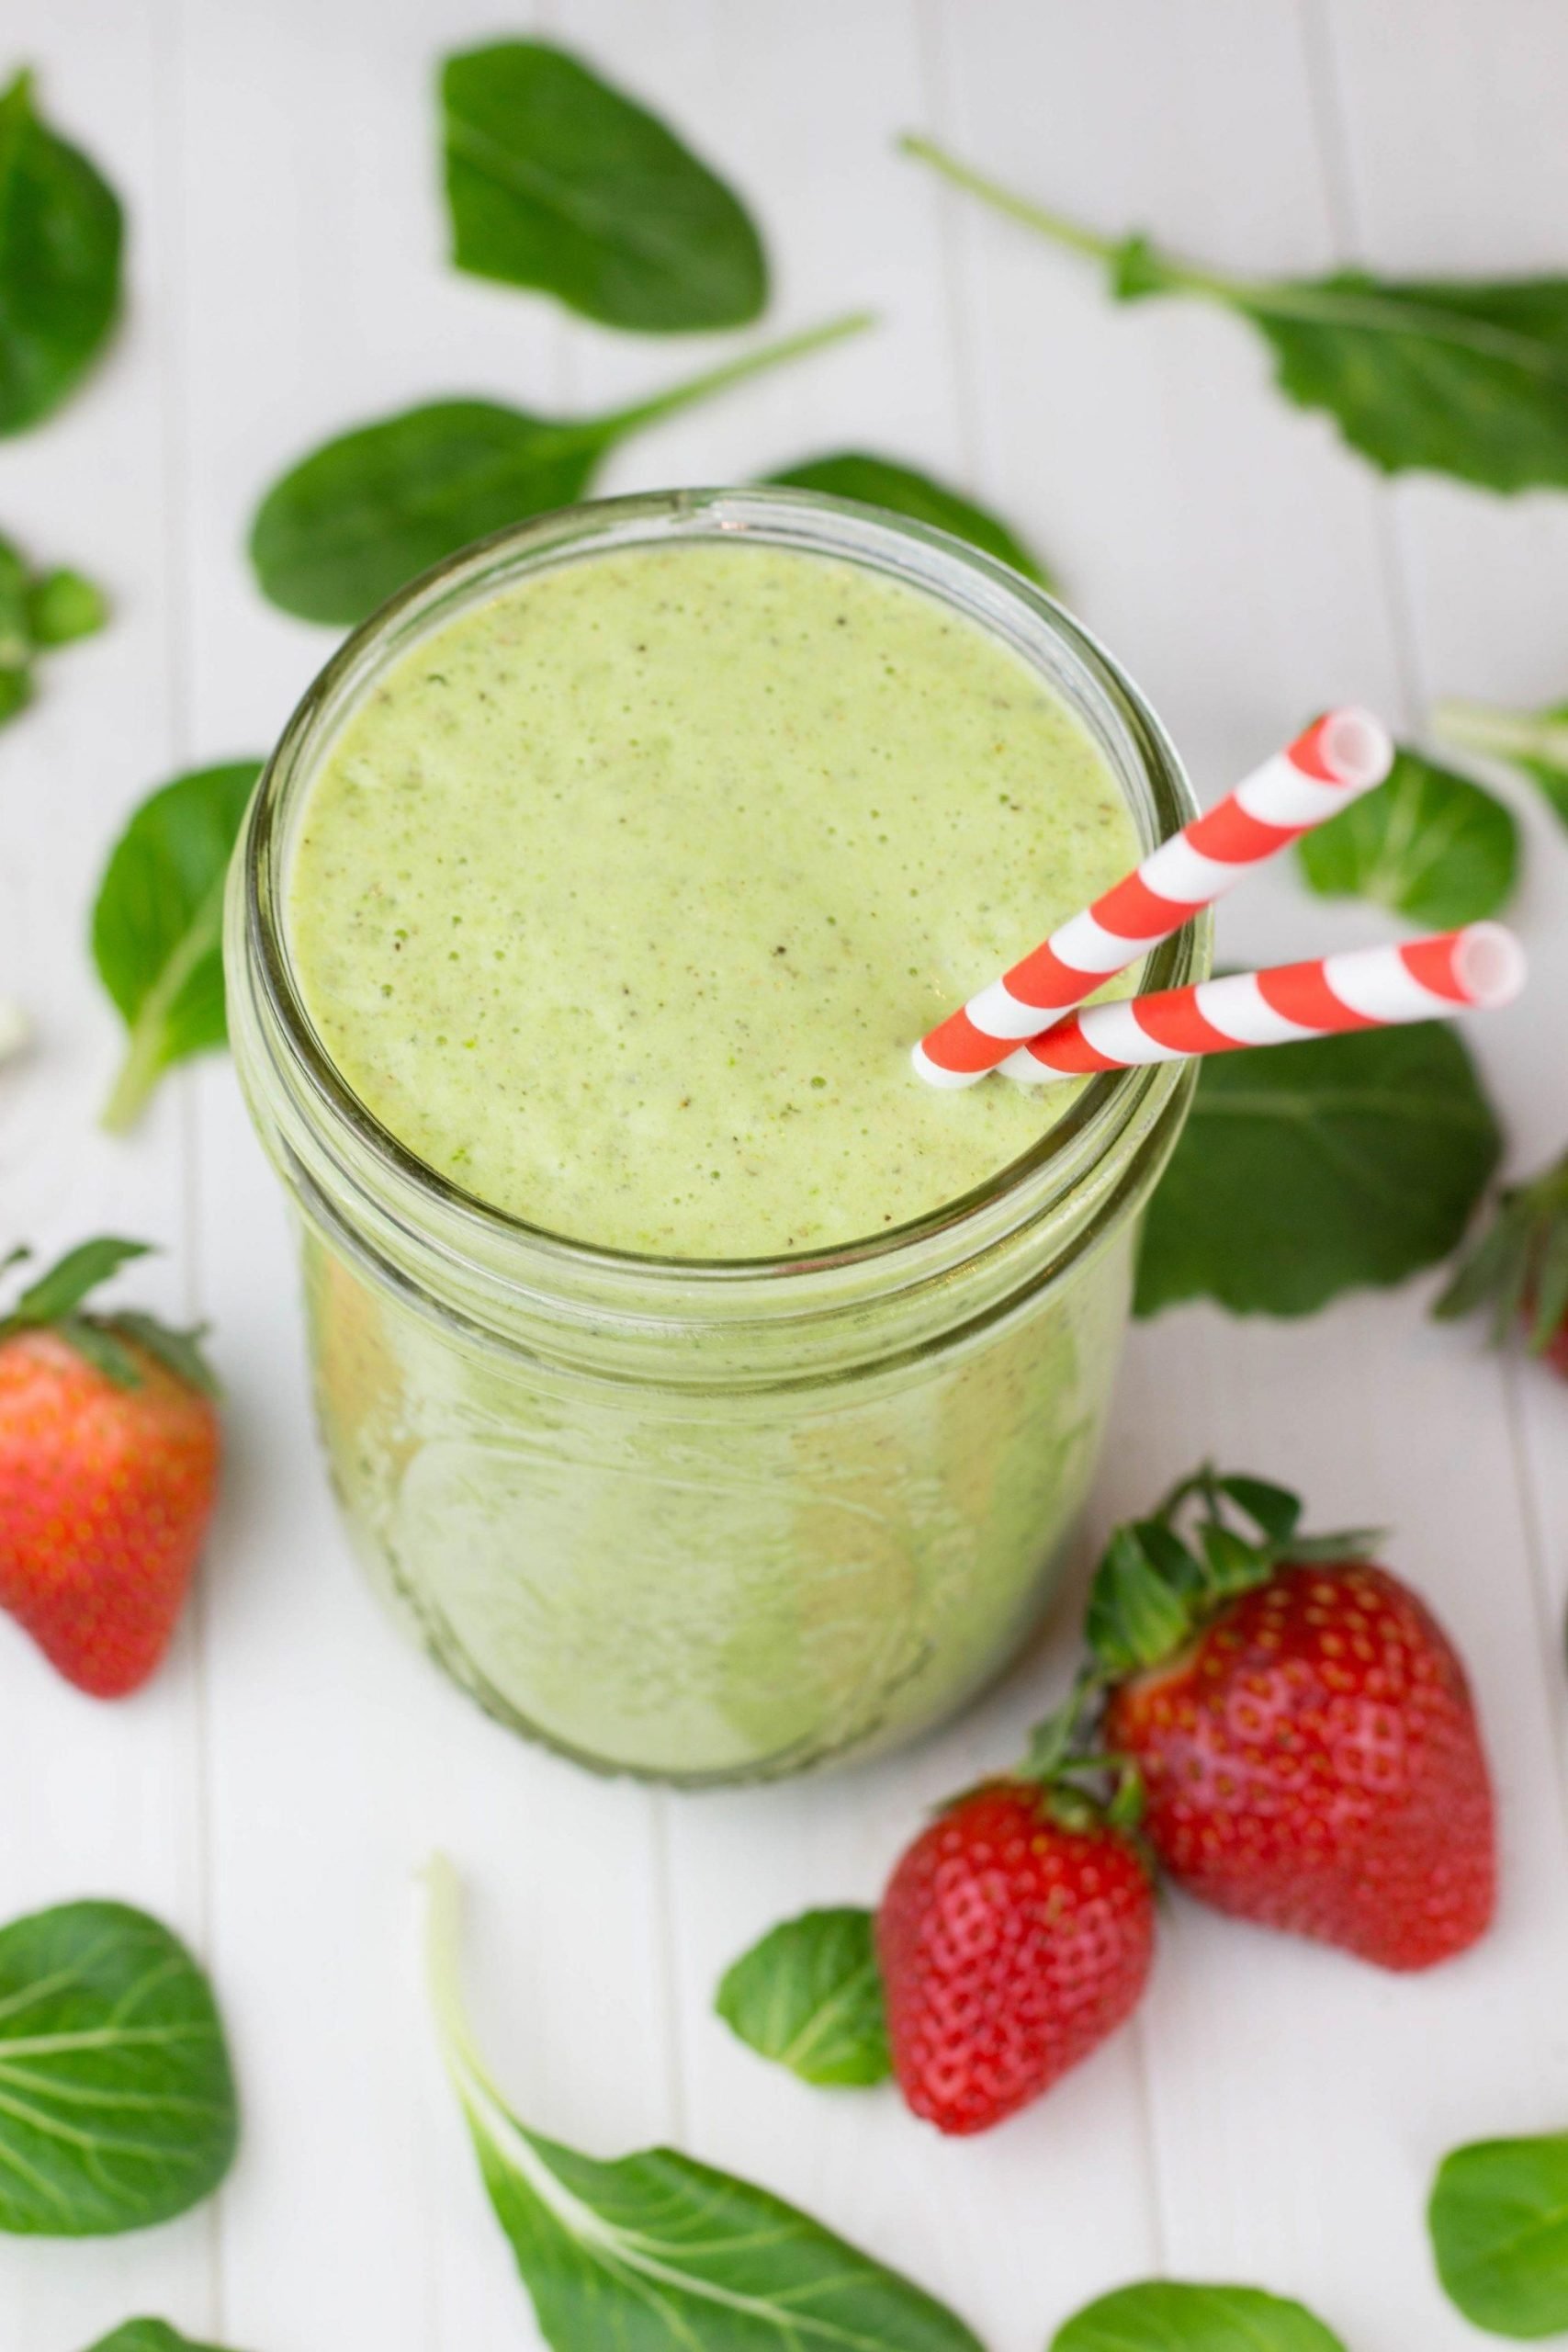 Pineapple Spinach Green Smoothie recipe with Chia seeds is ...